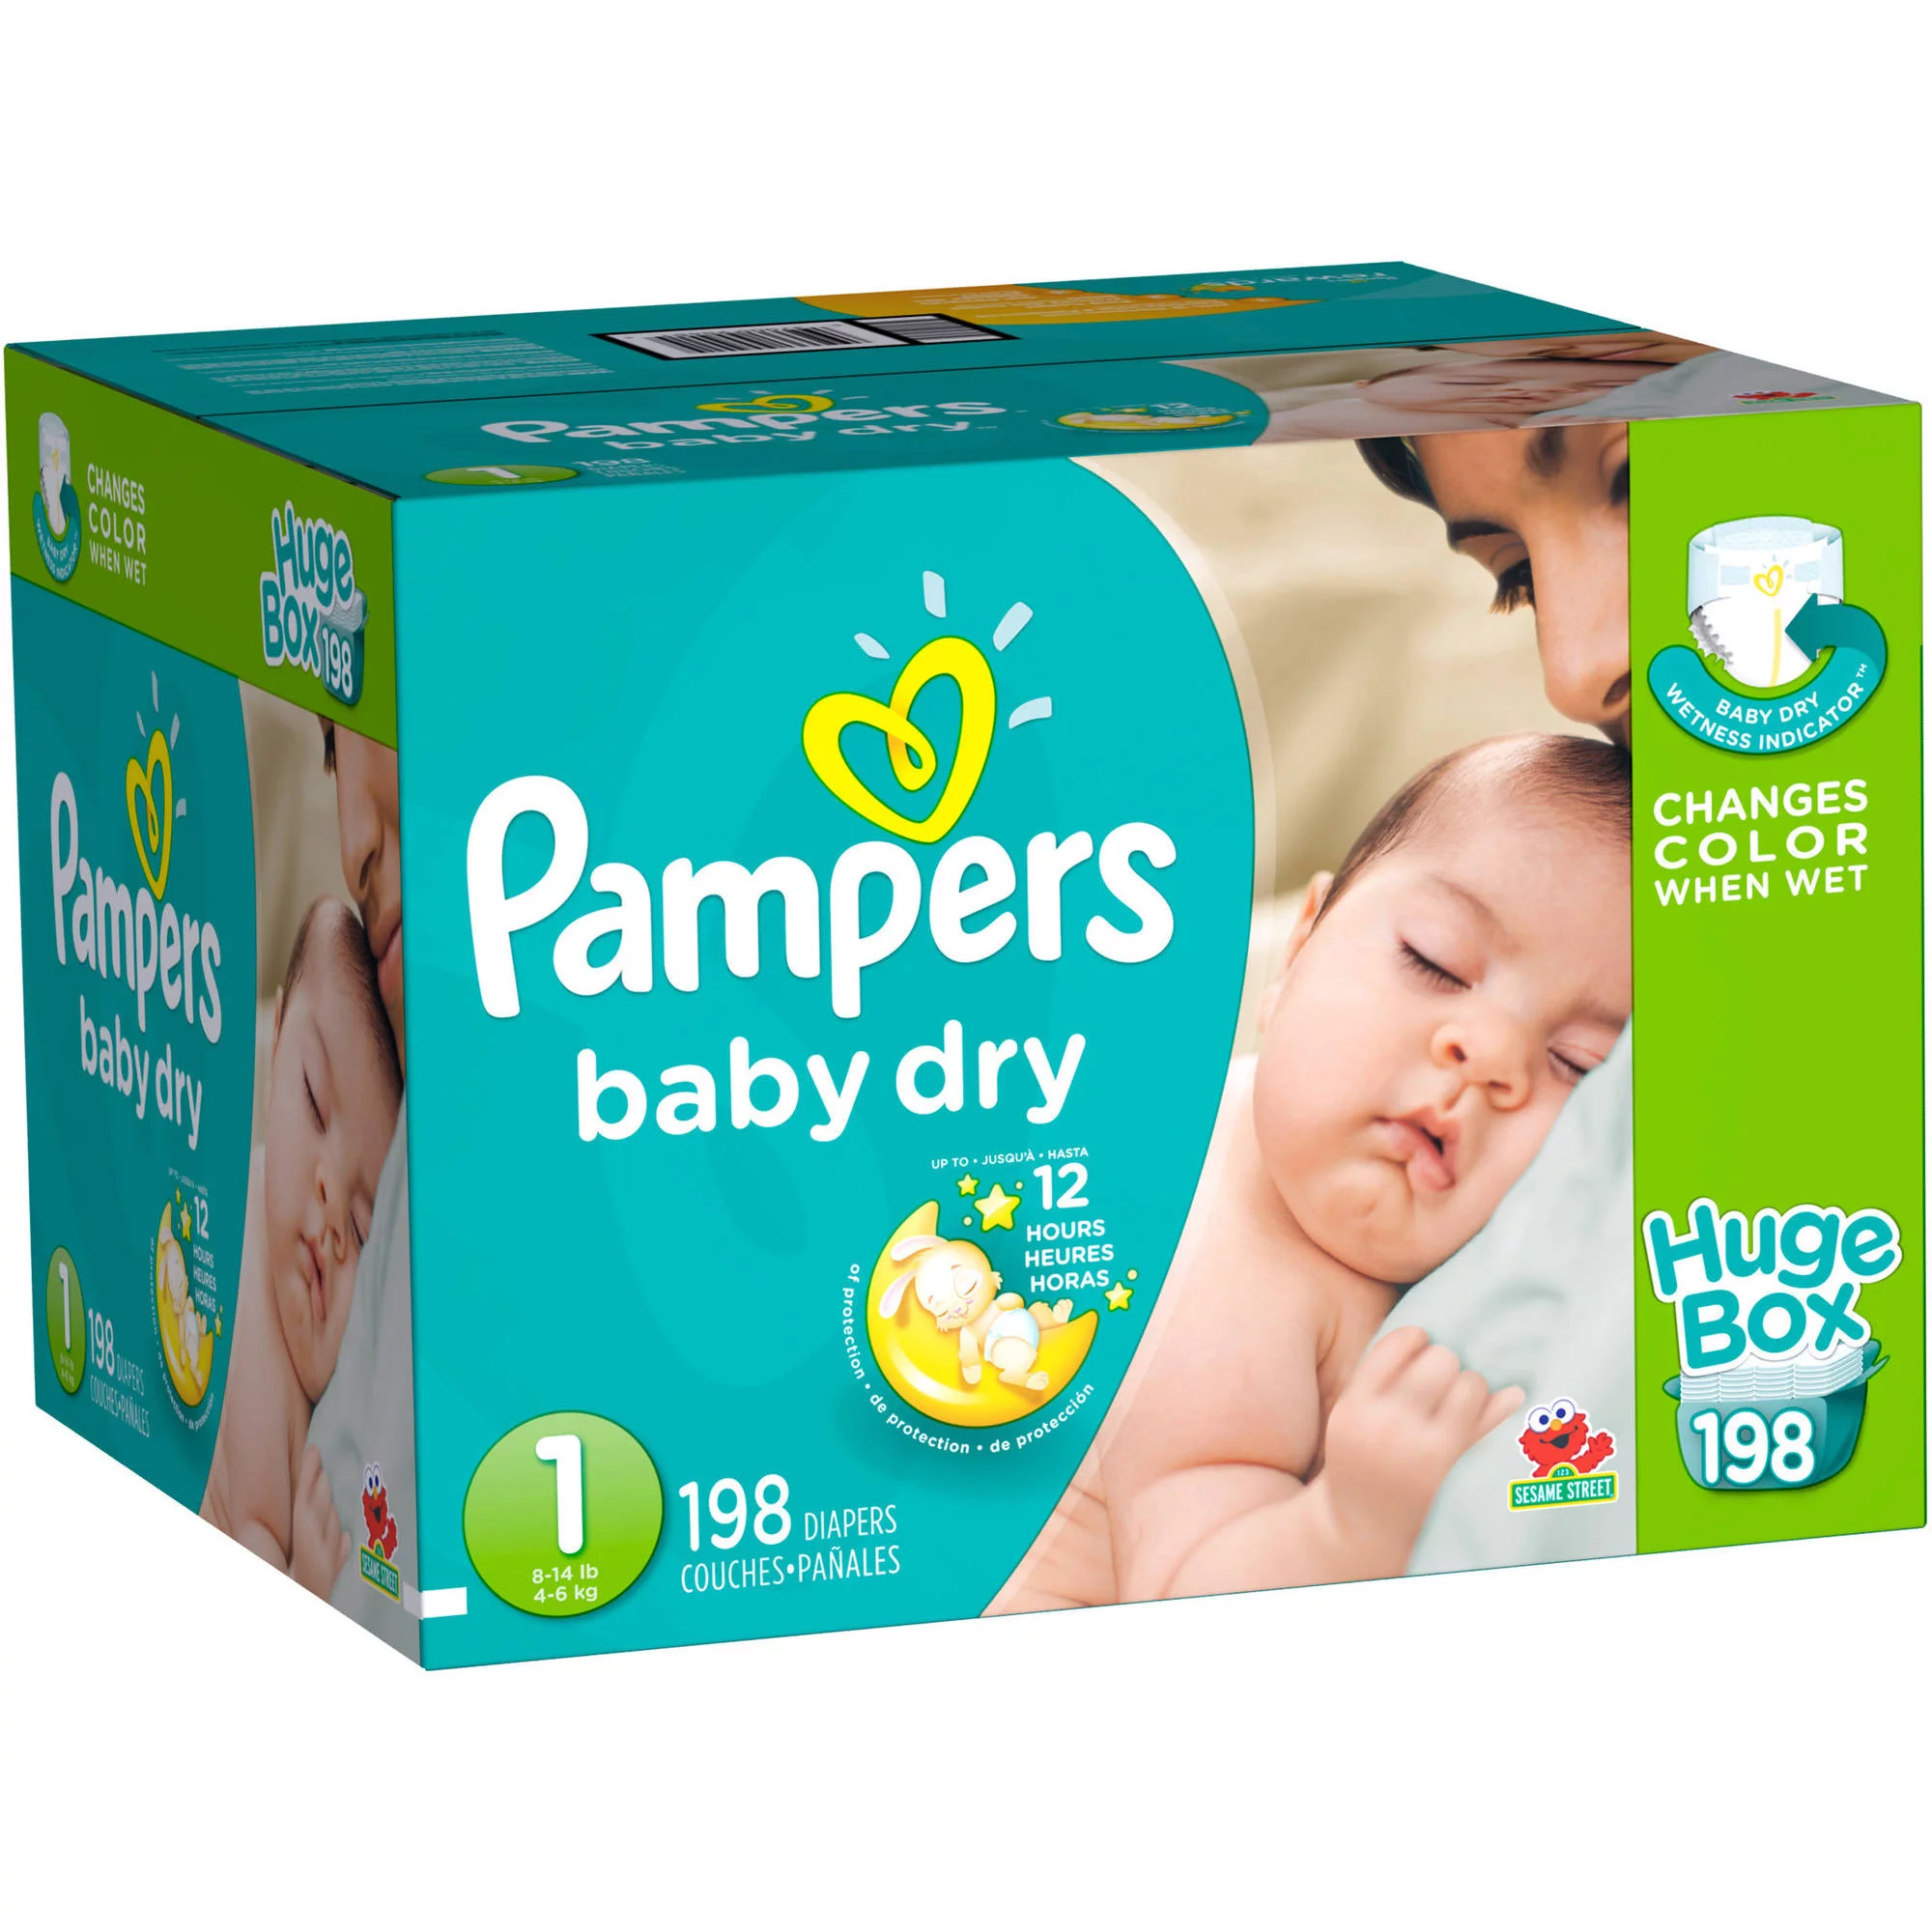 Buy Pampers Baby Dry Diapers Size 2 58 pieces Online